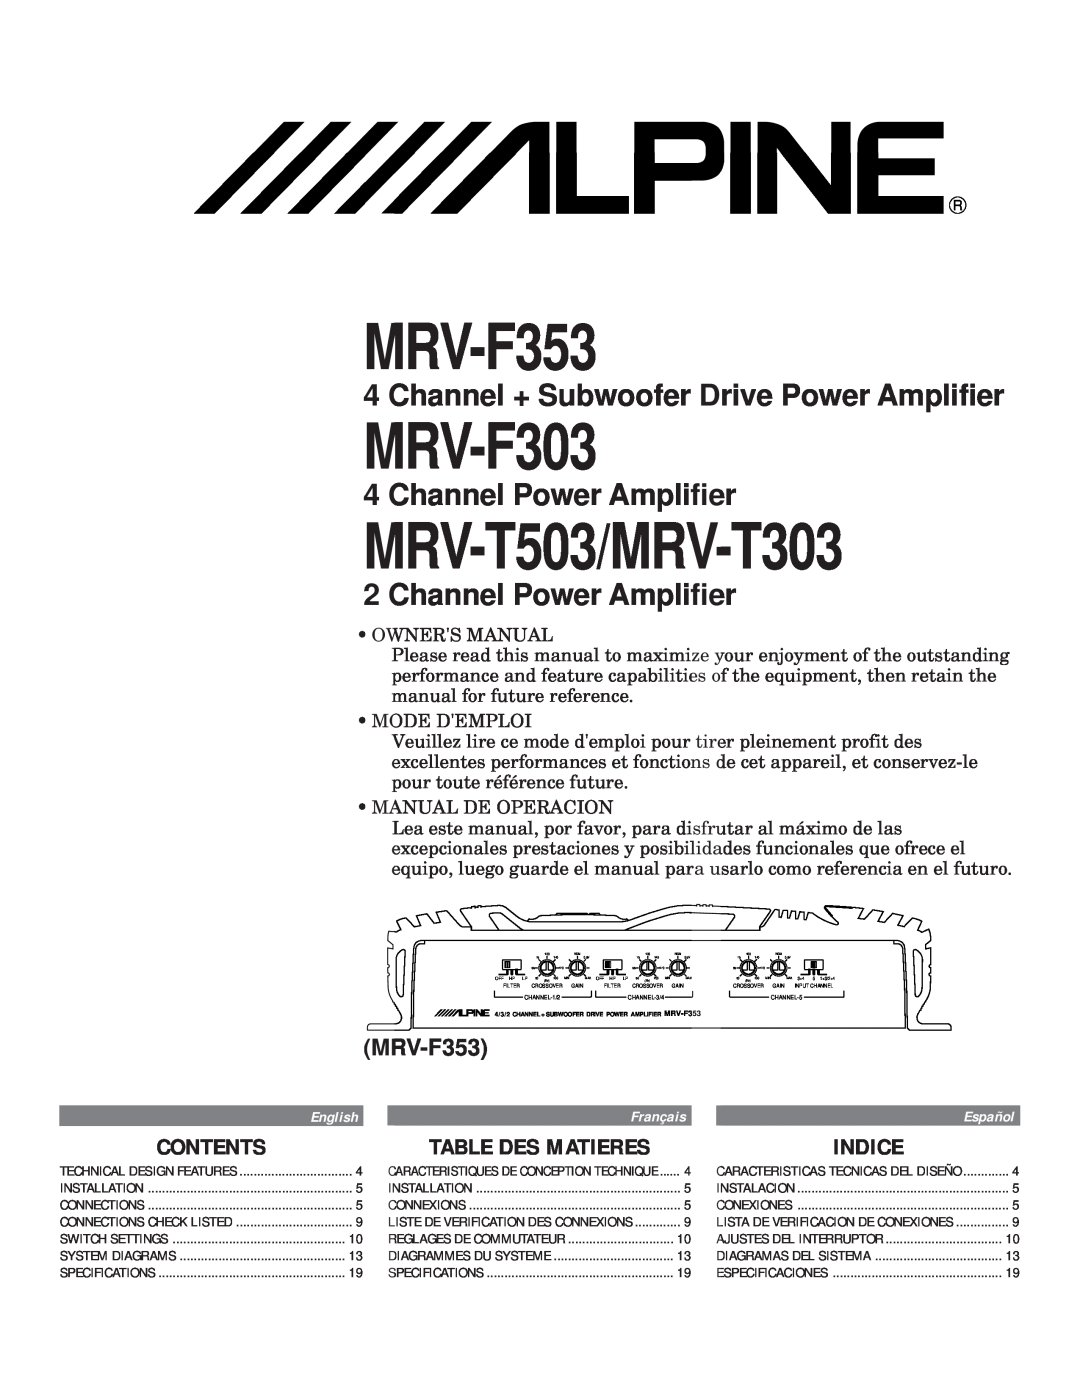 Alpine MRV-F353 owner manual Contents, Indice, Table Des Matieres, MRV-F303, MRV-T503/MRV-T303, Channel Power Amplifier 